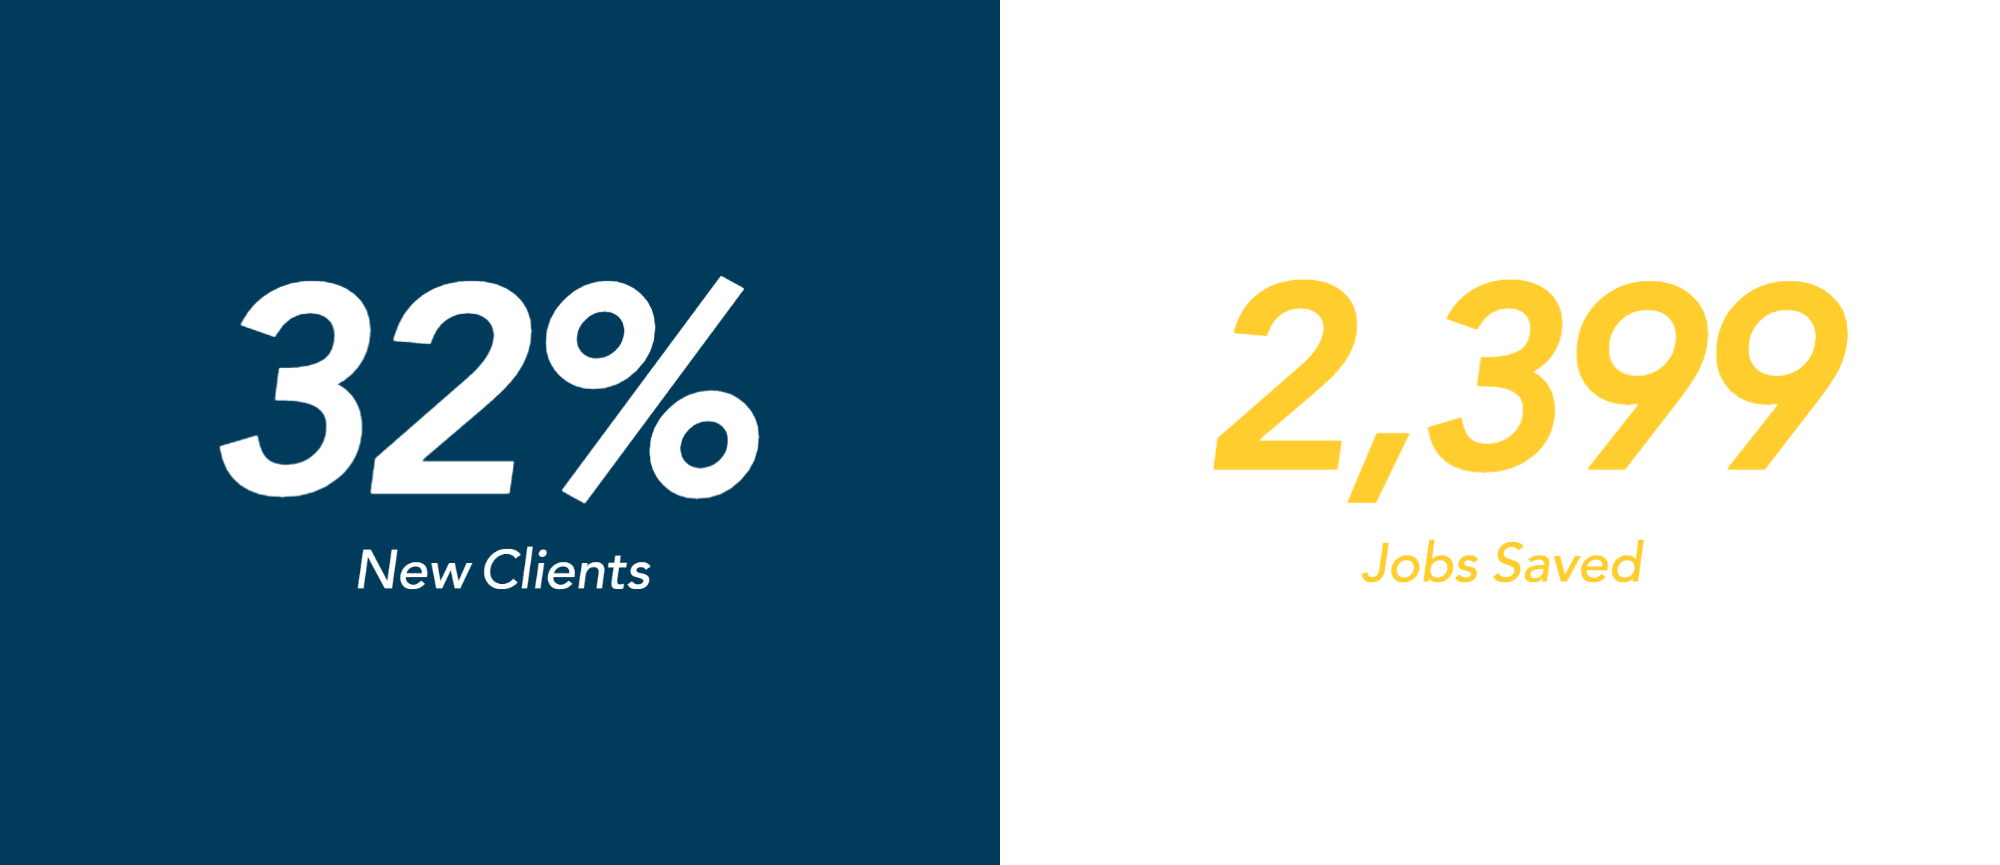 32% New Clients and 2,399 jobs saved